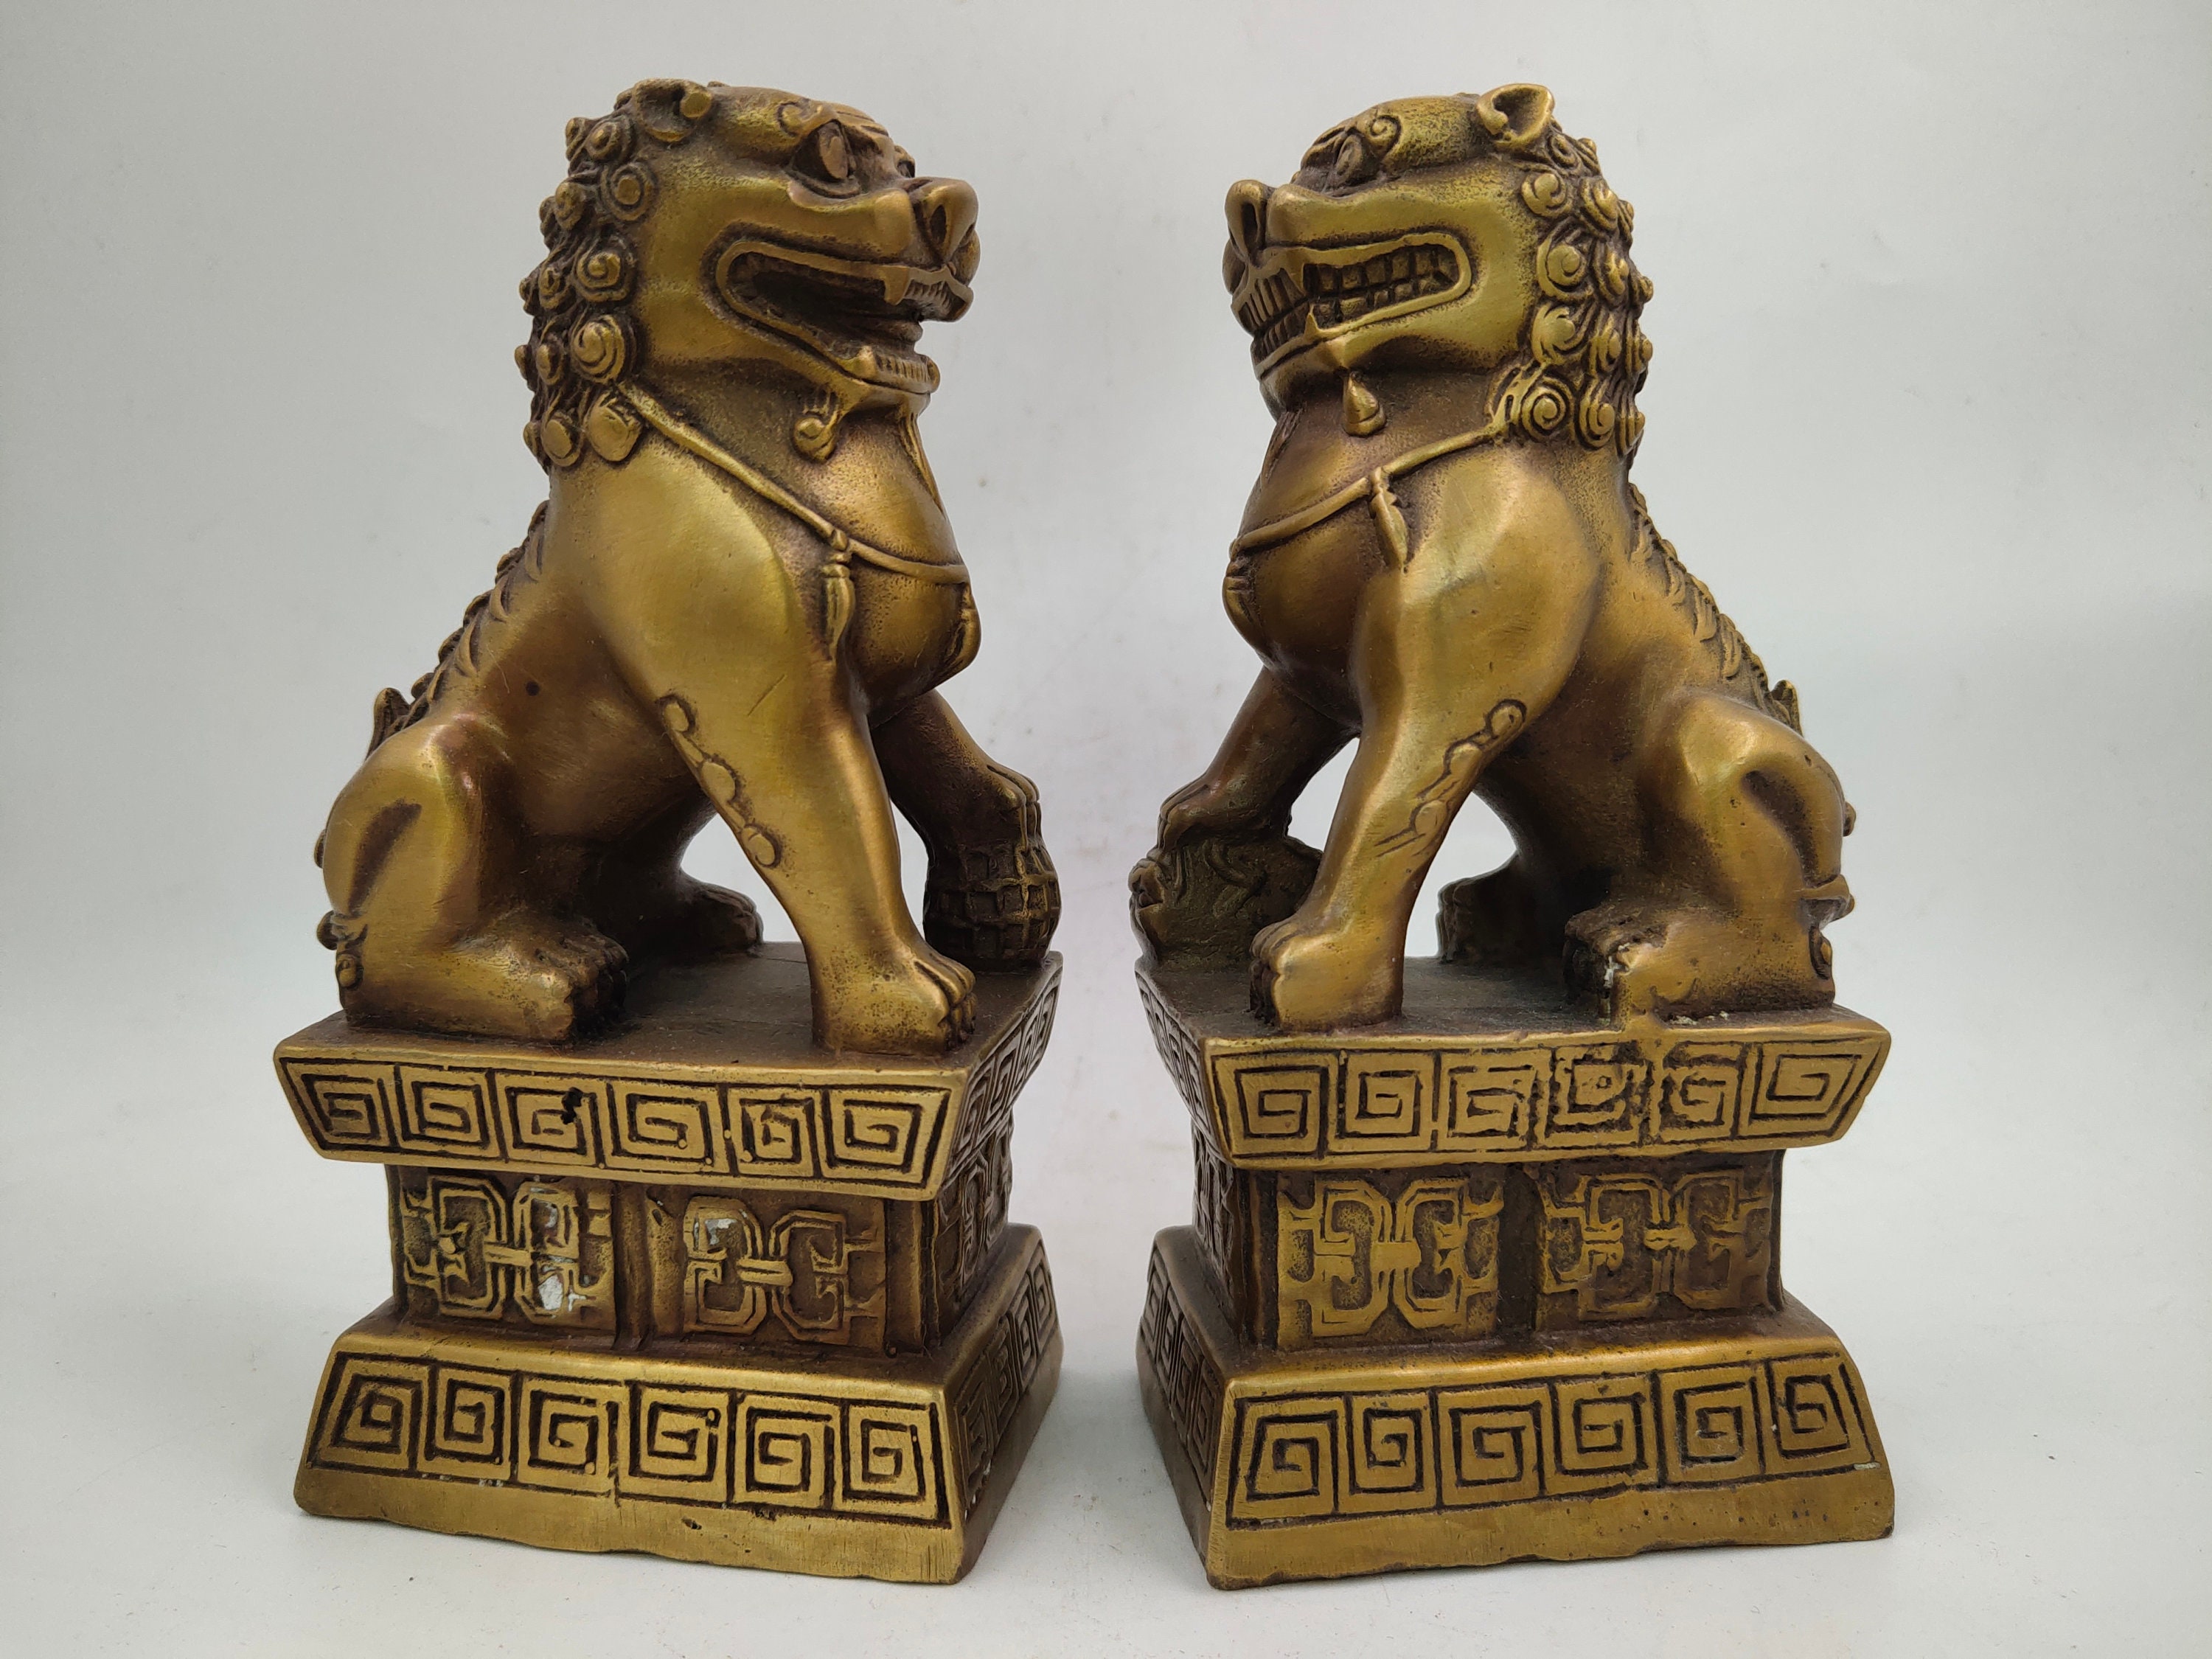 8" chinese bronze fengshui Ward off evil foo dog lion Guardian beast statue pair 